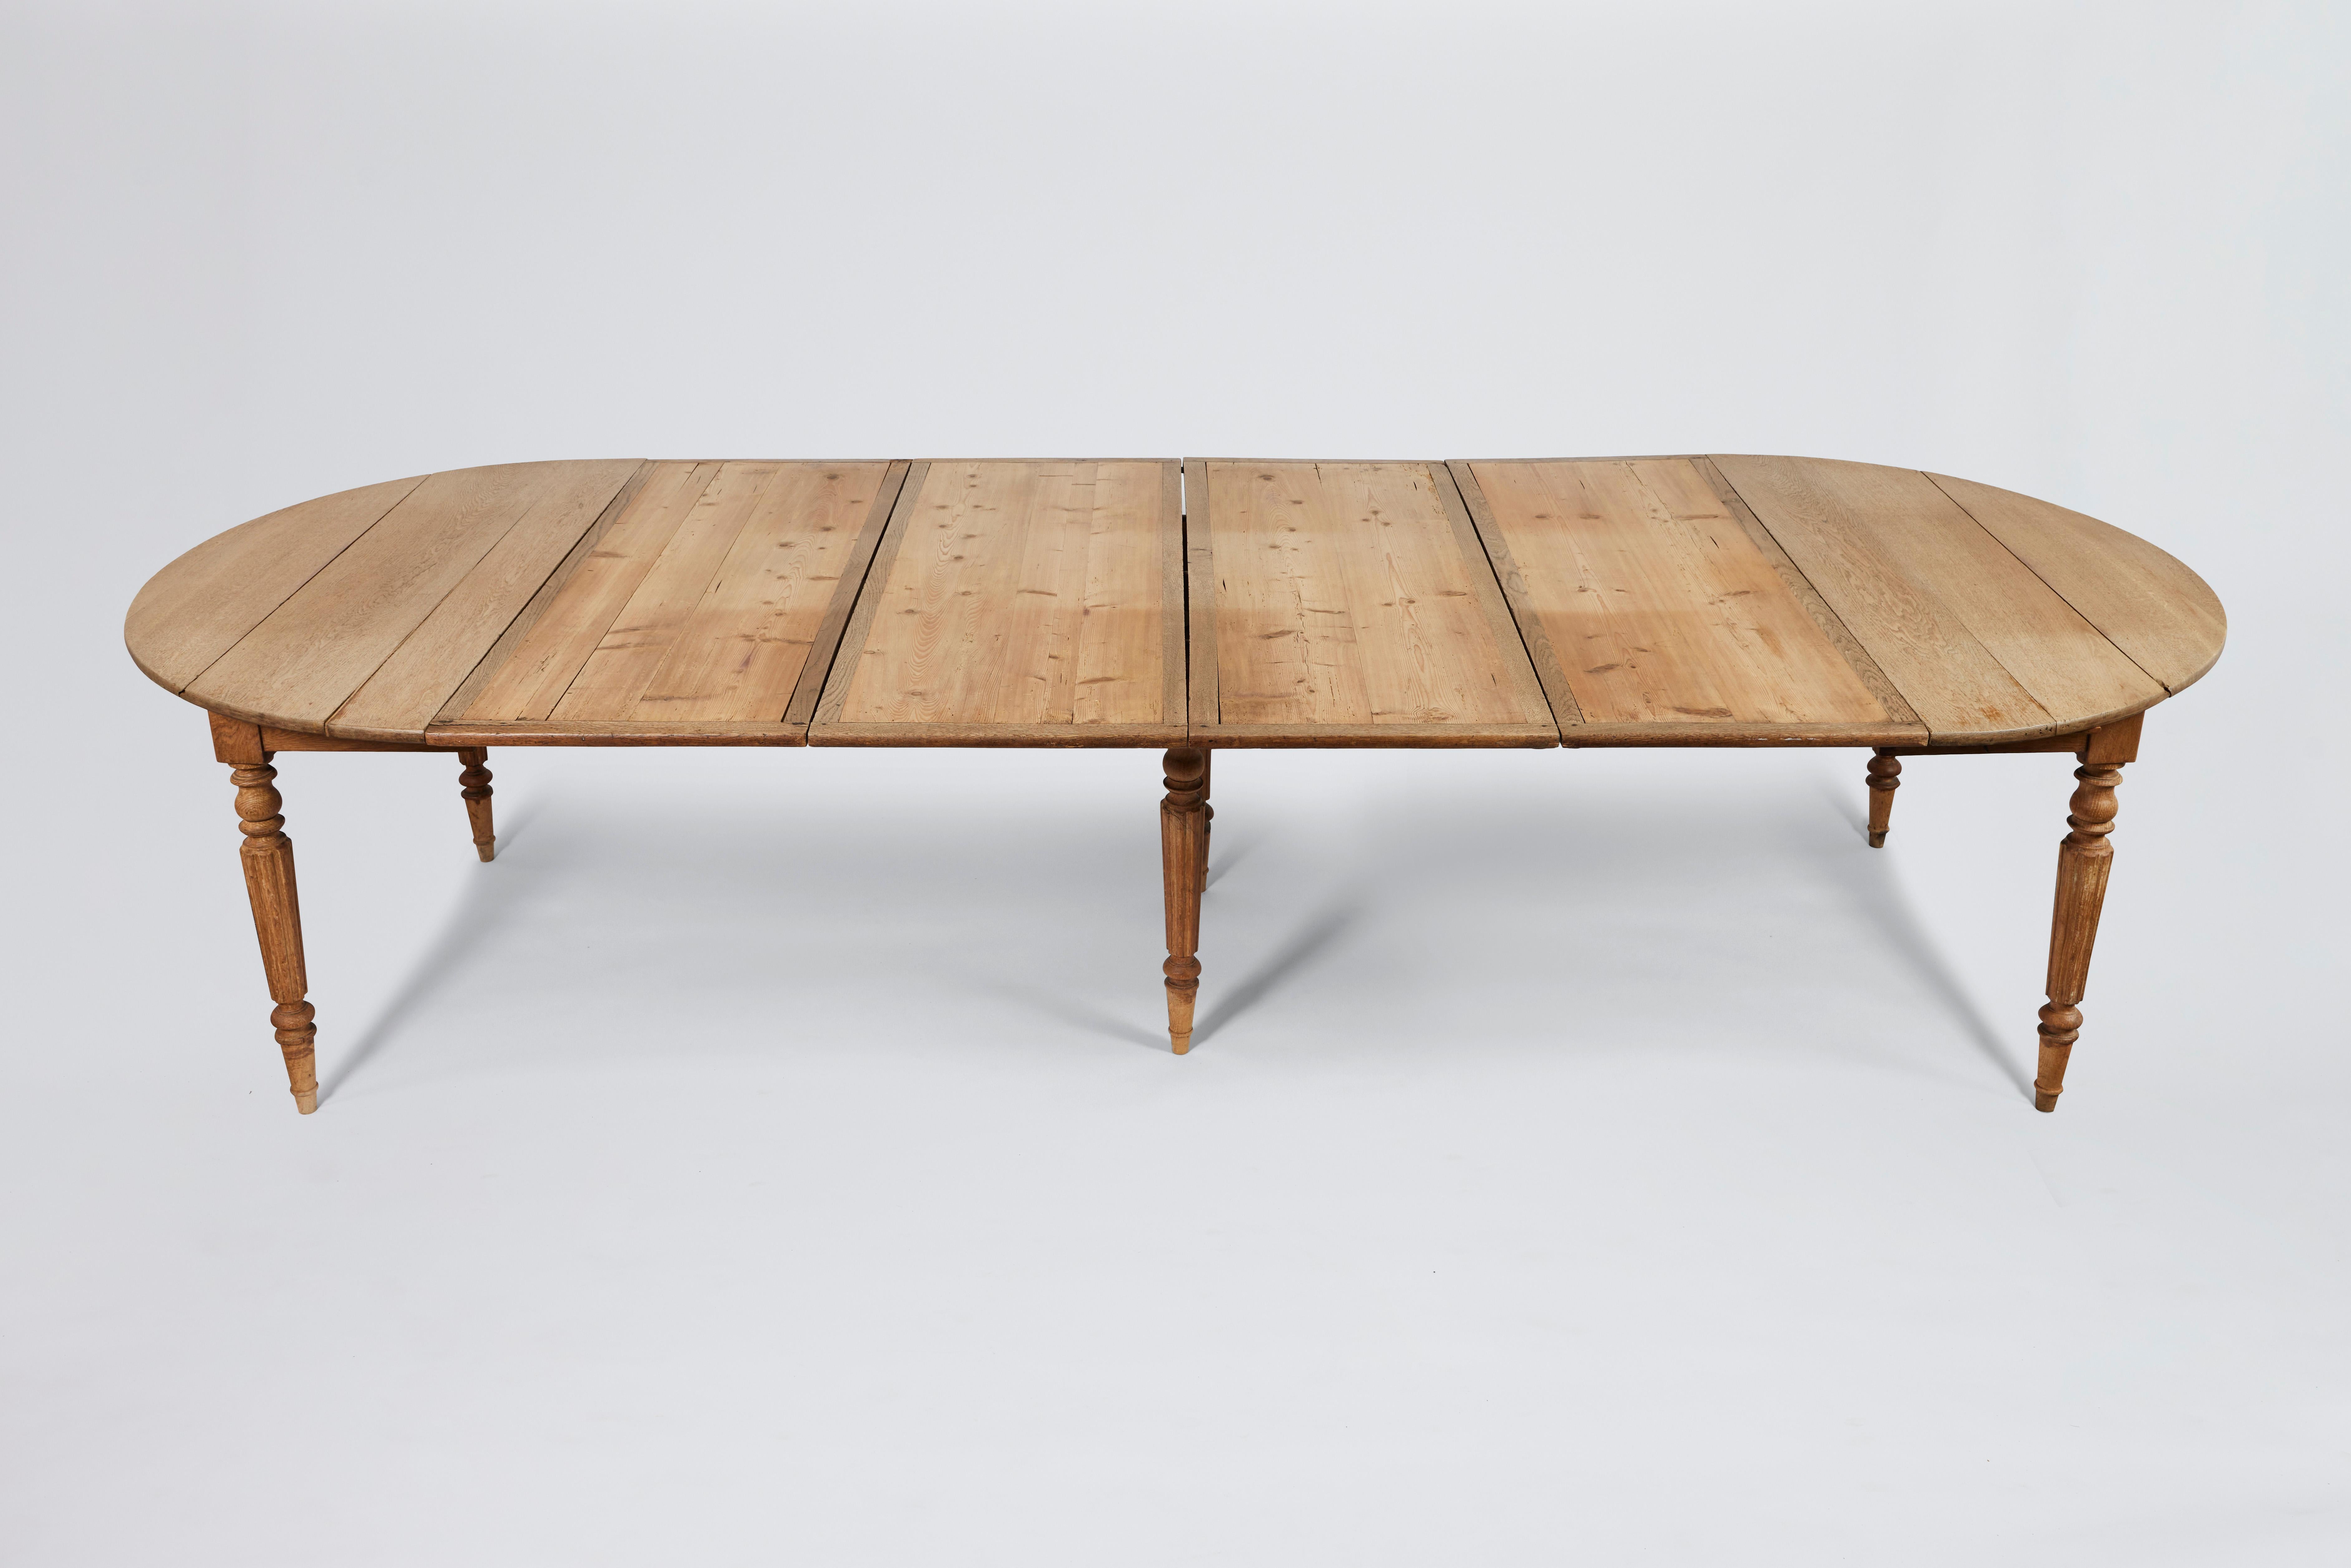 19th Century English Georgian-style oak expandable dining table with four leaves, sitting on five (5) carved reeded legs. 

4 leaves, each 20.25